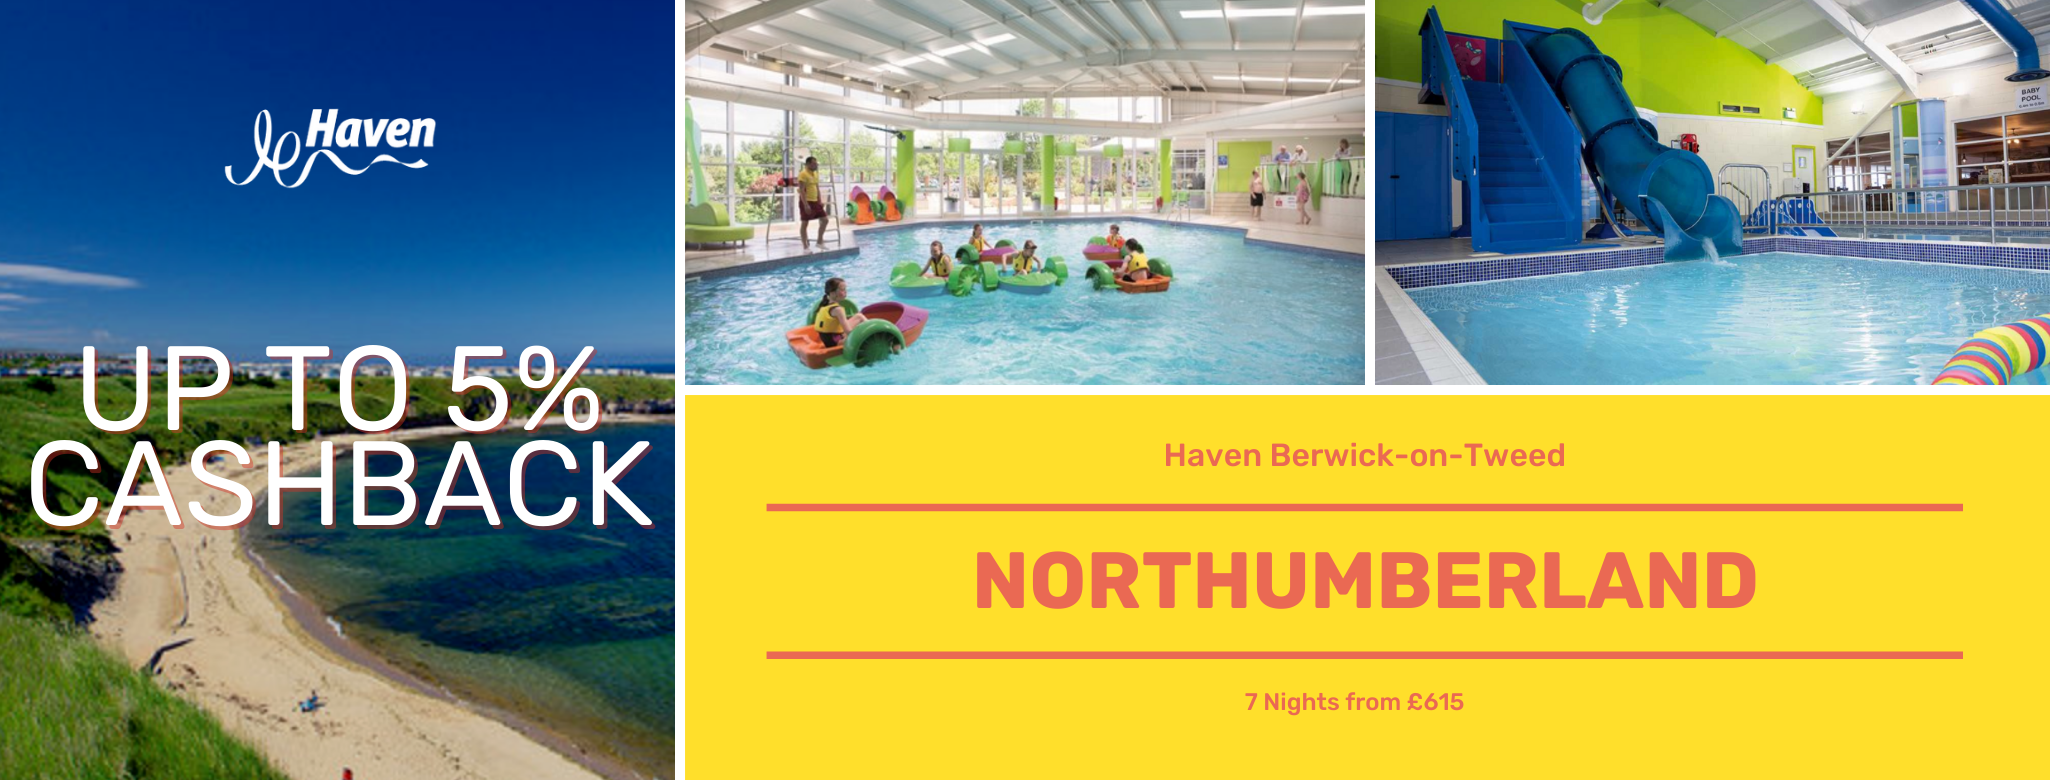 Haven Holiday Northmberland Up to 5% Cashback